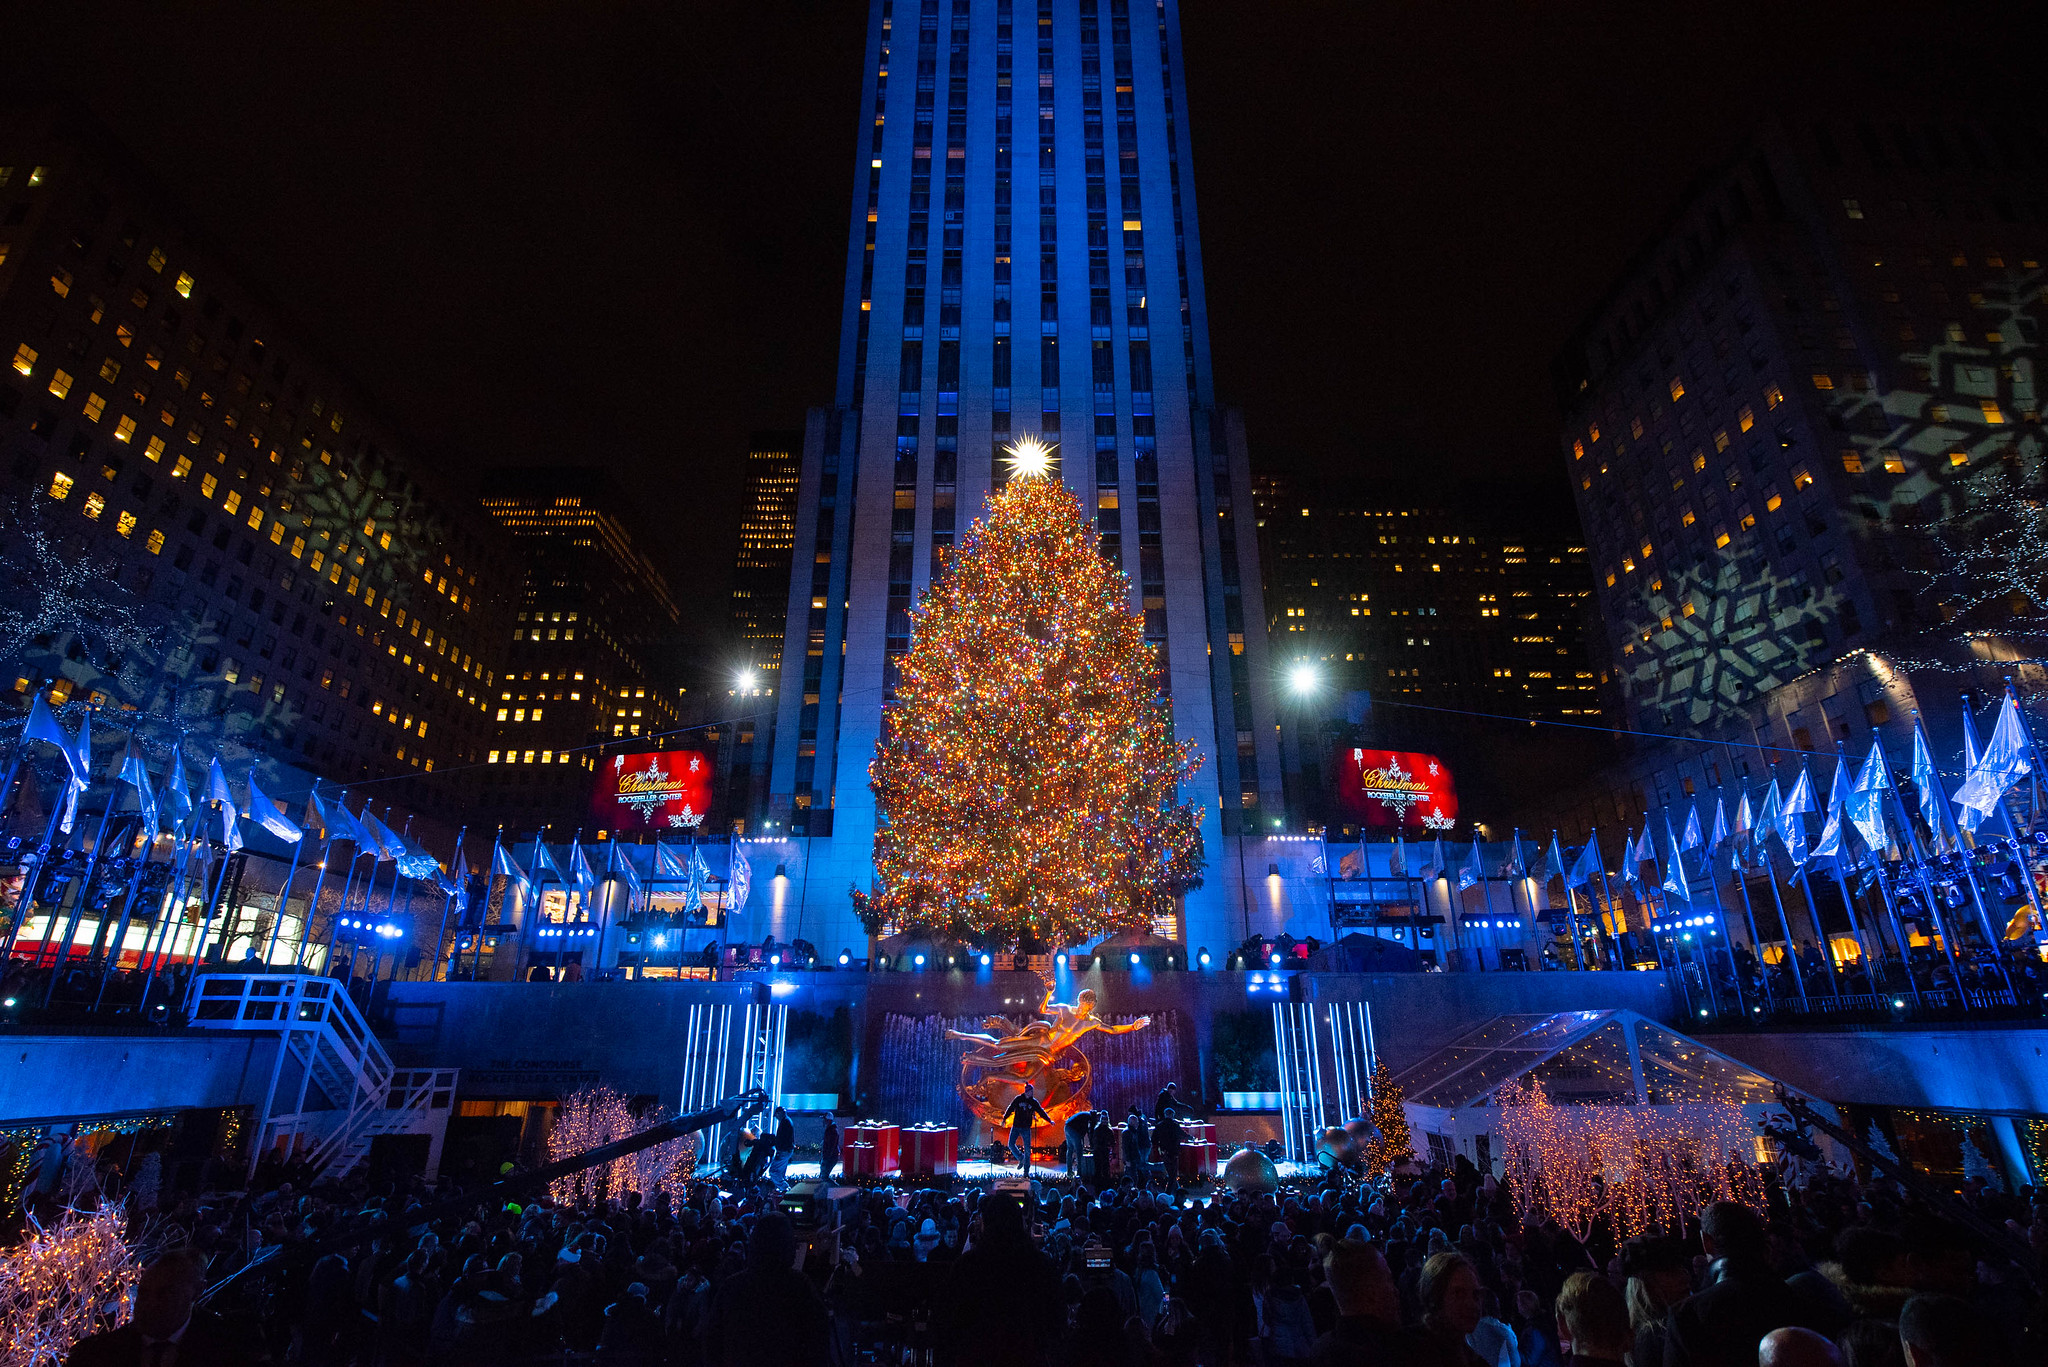 A wide view of the spectacularly lit Rockefeller Christmas Tree Lighting Ceremony in Rock Center in 2018.